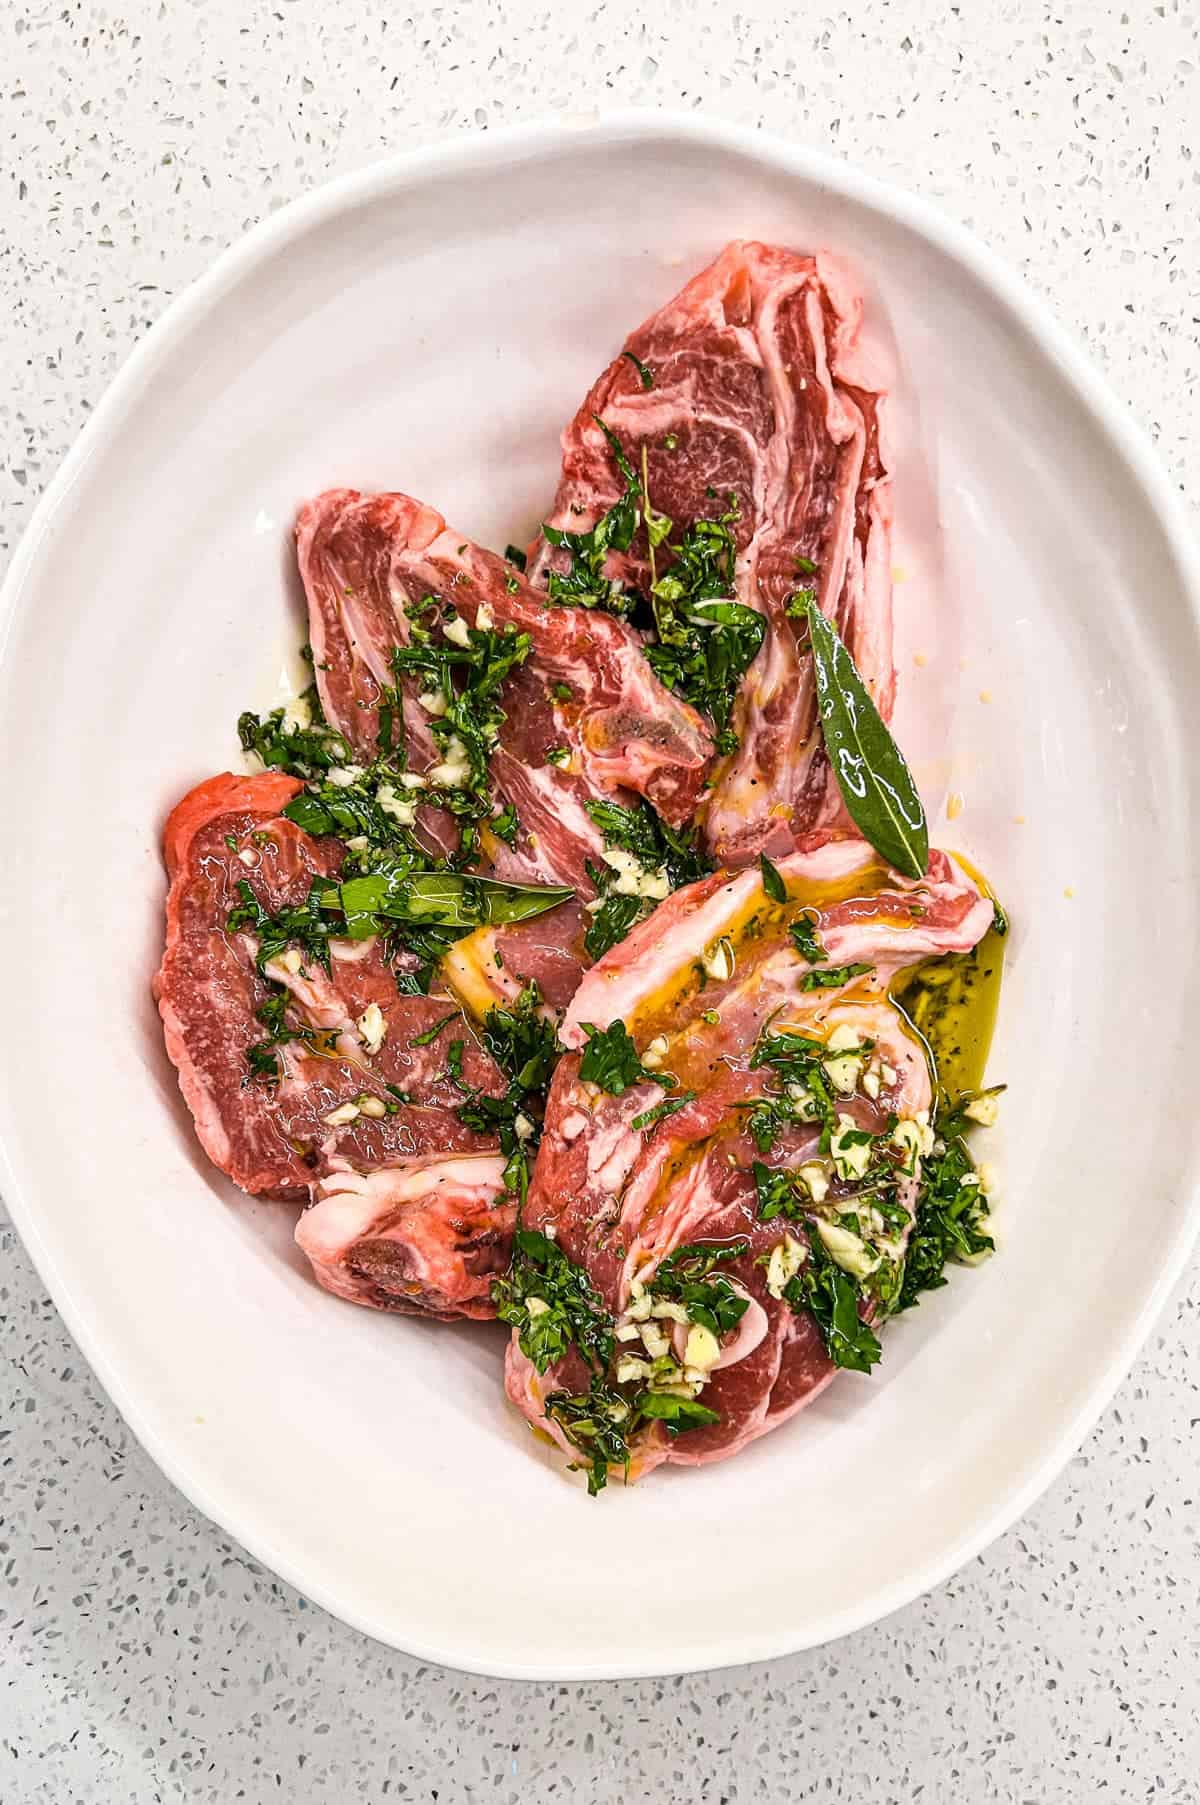 A combination of oil, lemon, garlic and fresh herbs create a simple marinade for Greek style lamb.